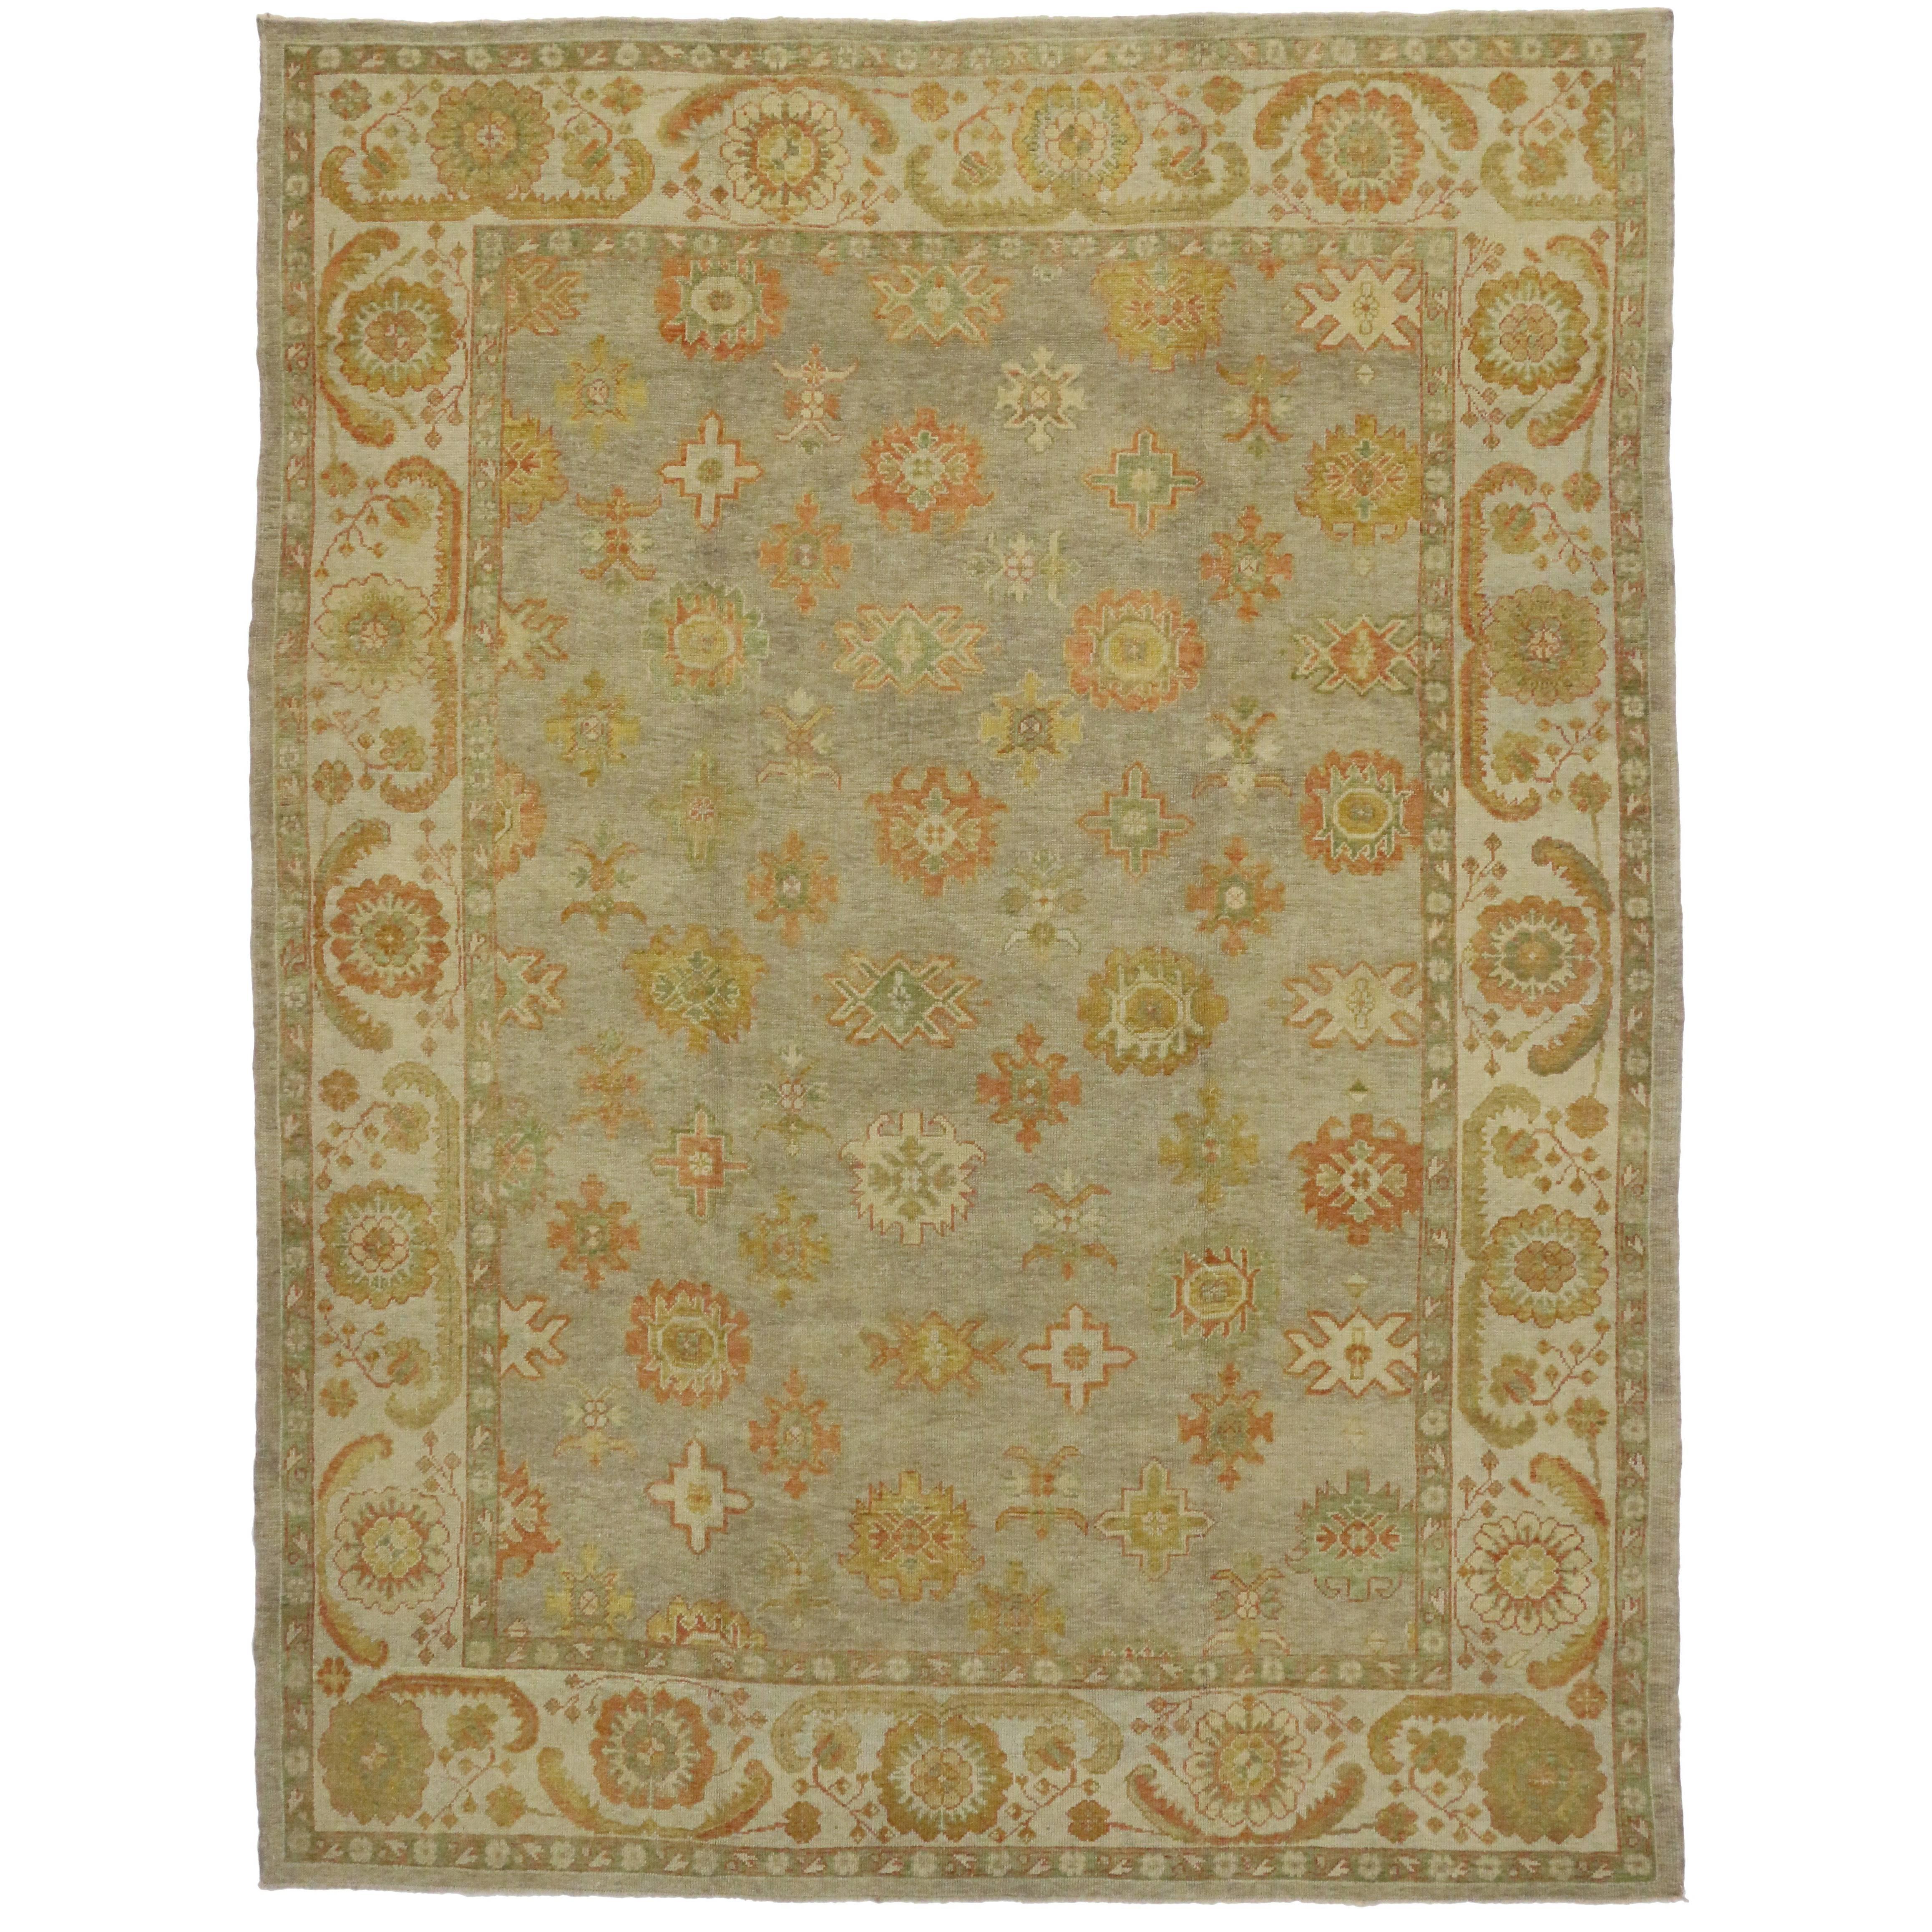 New Contemporary Turkish Oushak Rug with Modern Arts & Crafts Style 